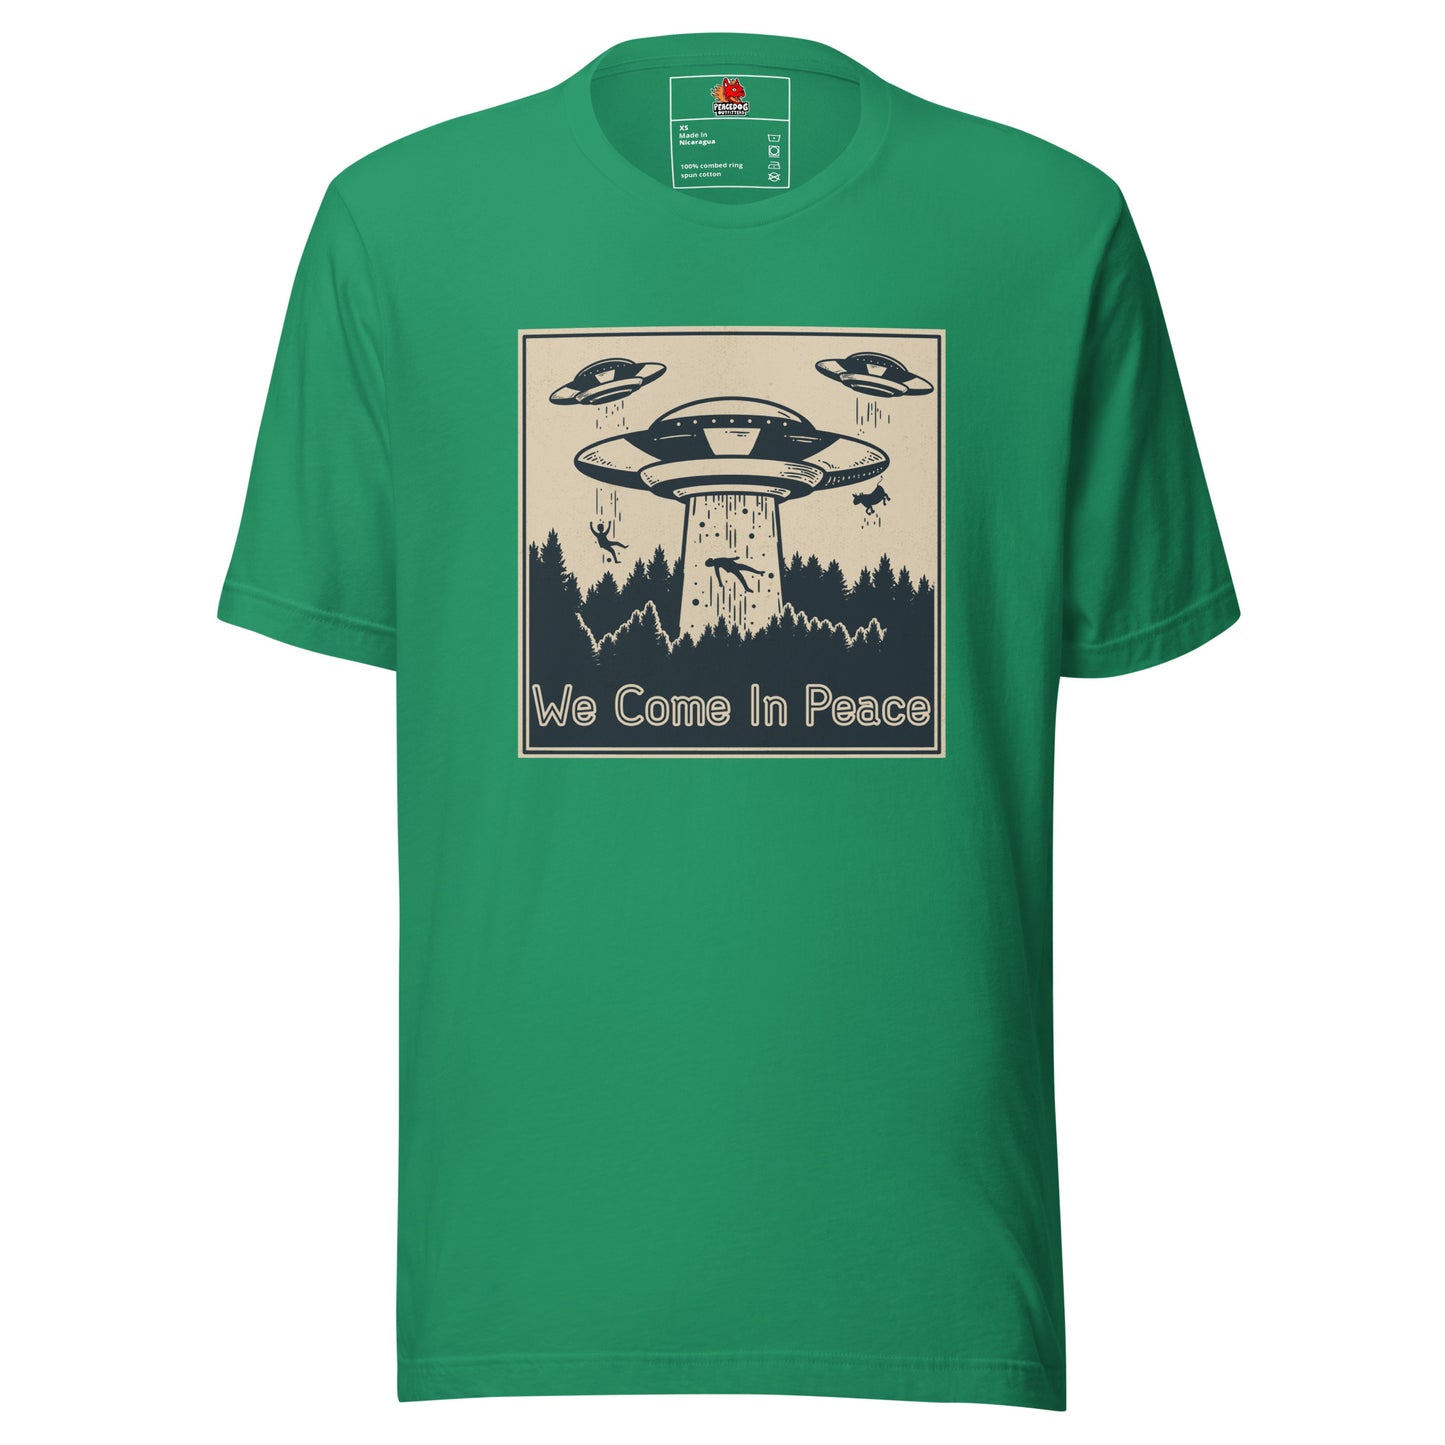 We Come in Peace T-shirt